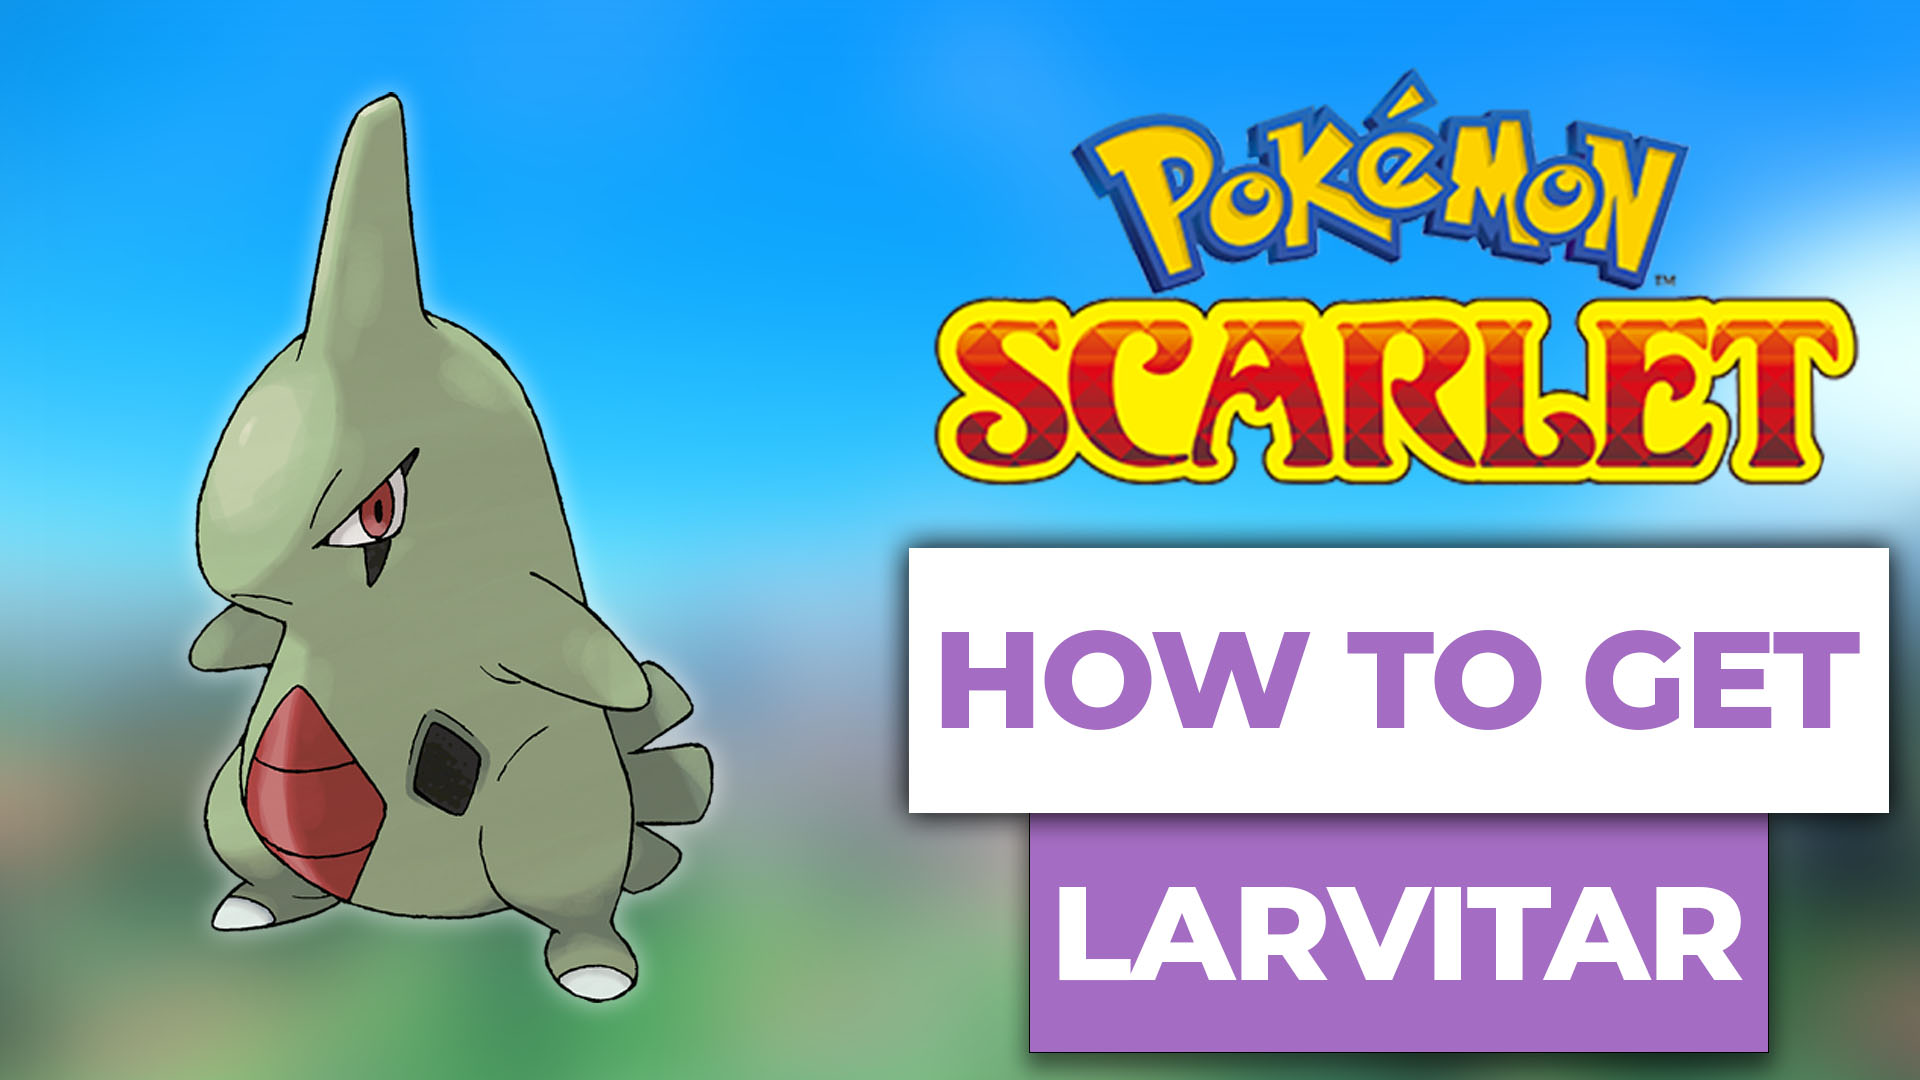 How To Get Larvitar In Pokemon Scarlet (The Easy Way)